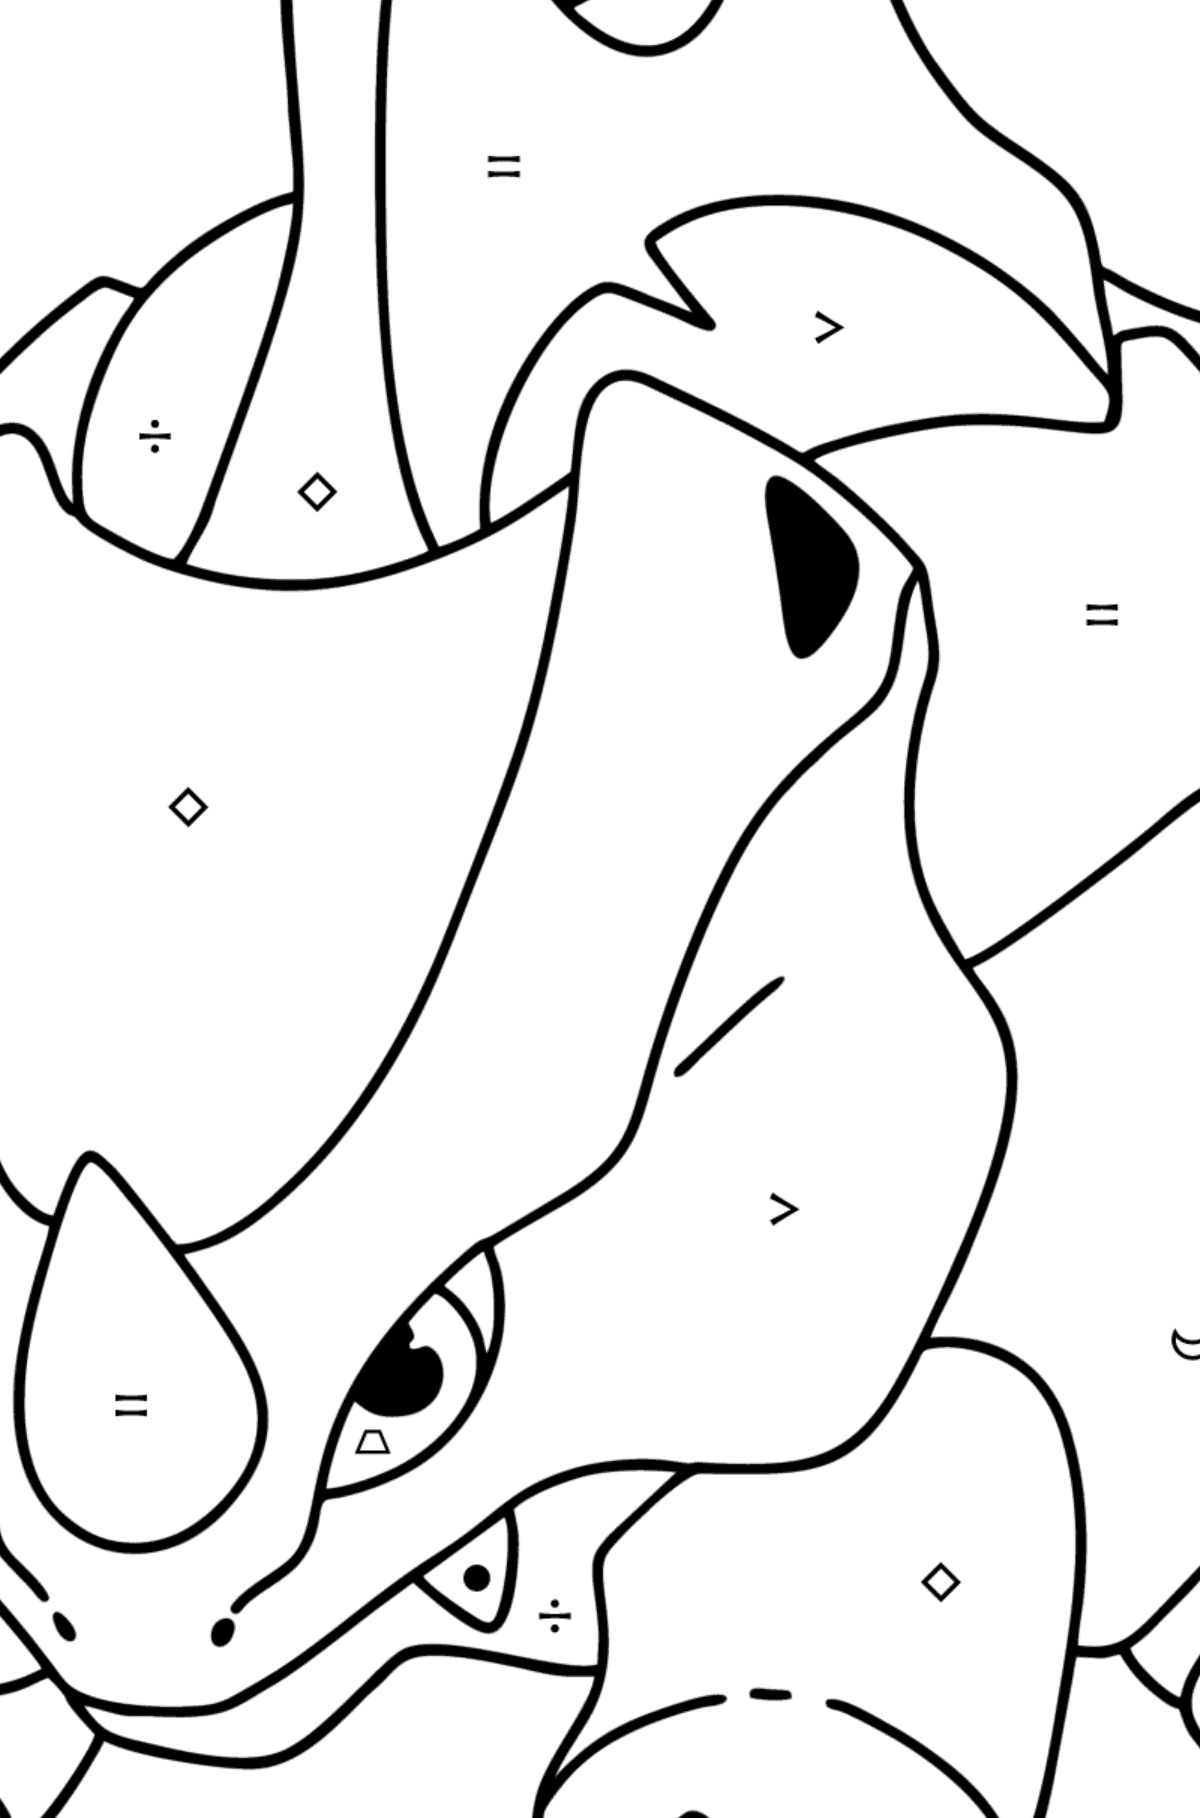 Coloring page Pokemon Go Rhyhorn - Coloring by Symbols and Geometric Shapes for Kids